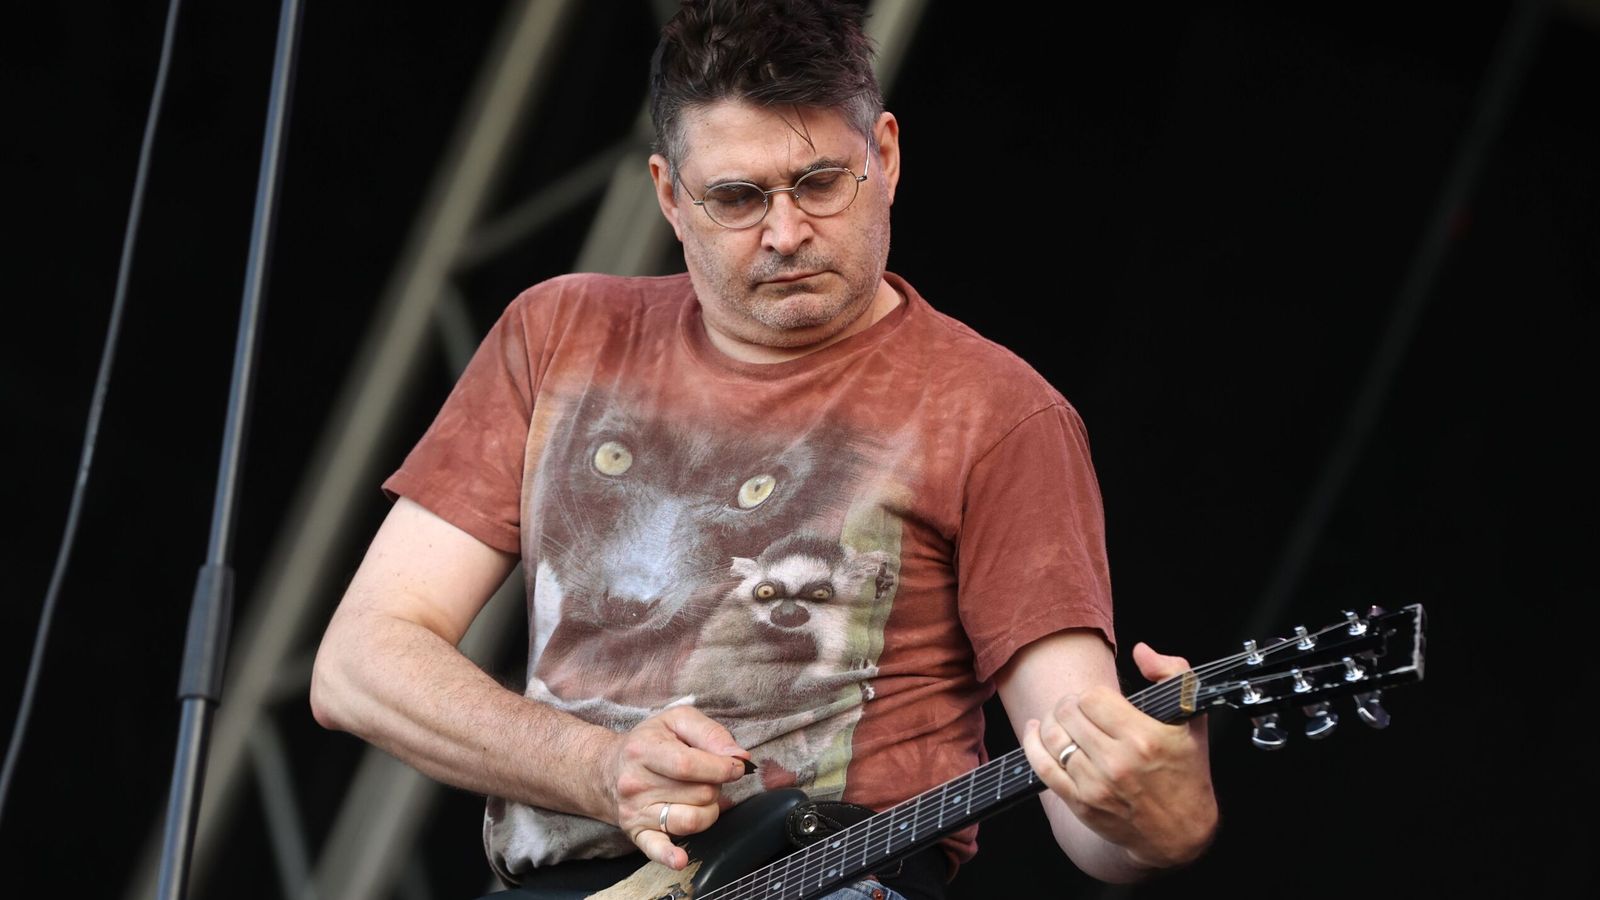 Steve Albini, producer of Nirvana and Pixies albums, has died aged 61